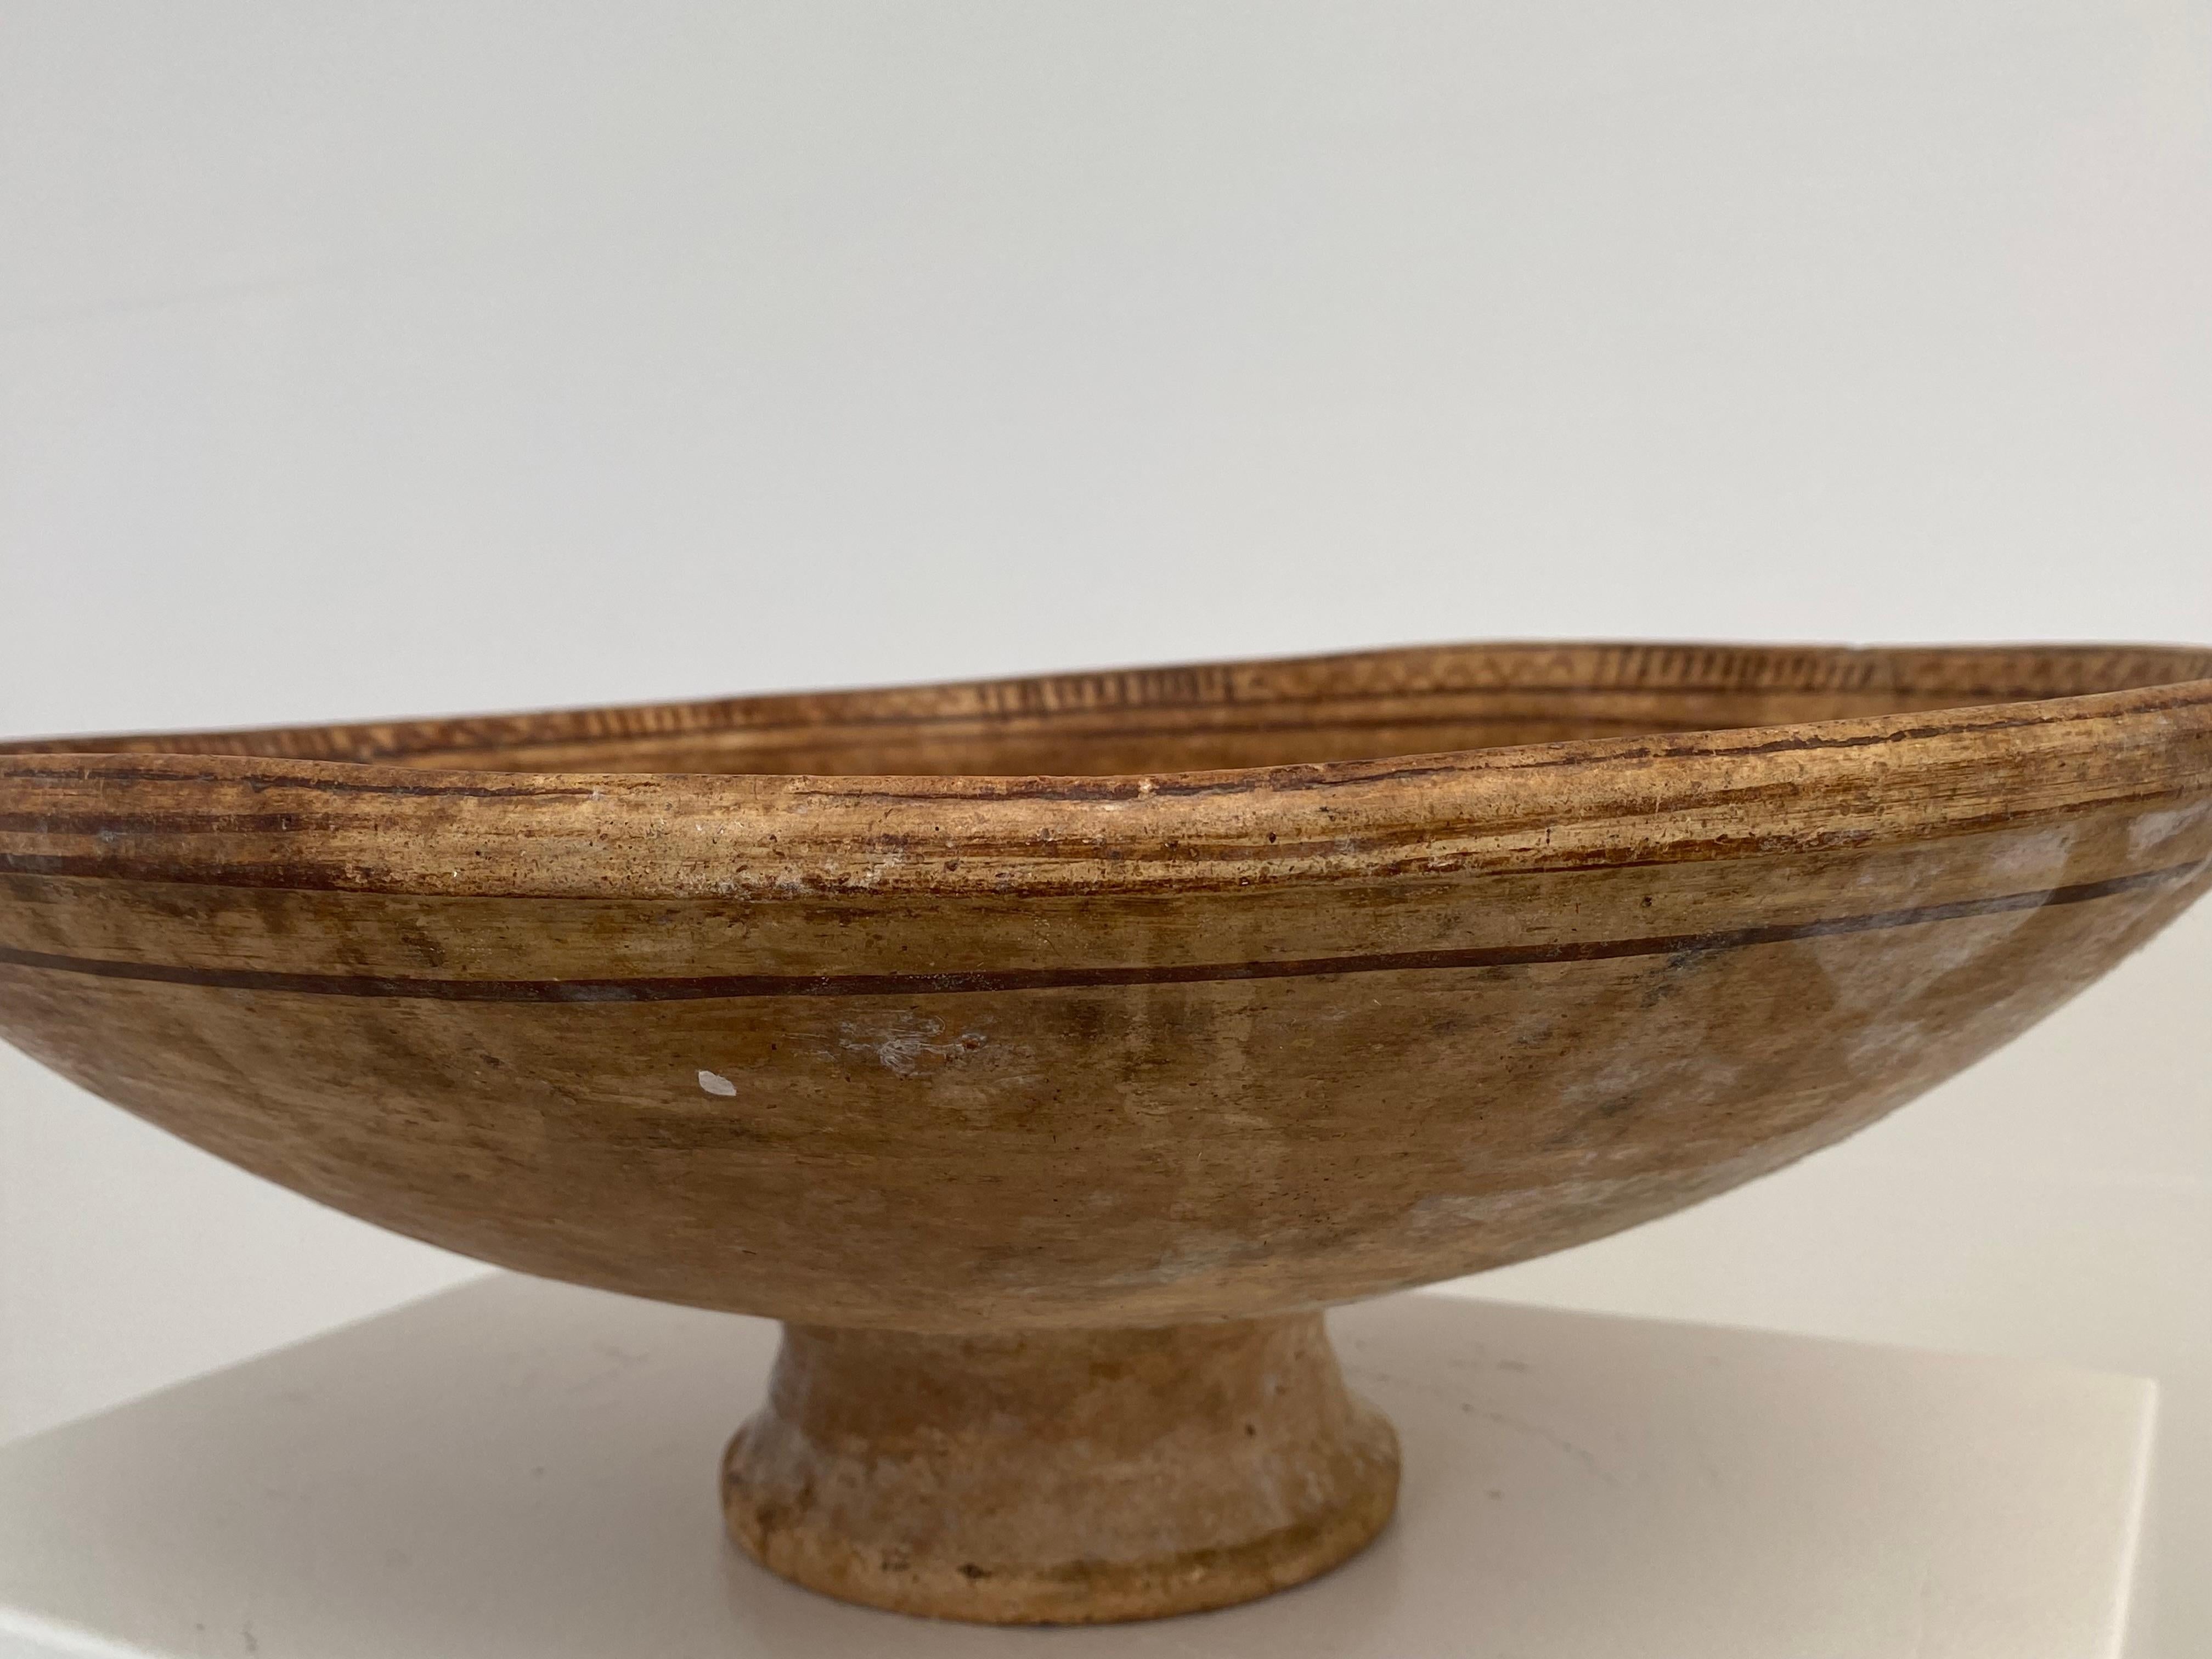 Antique, Terracotta Berber Bowl on a central foot For Sale 1